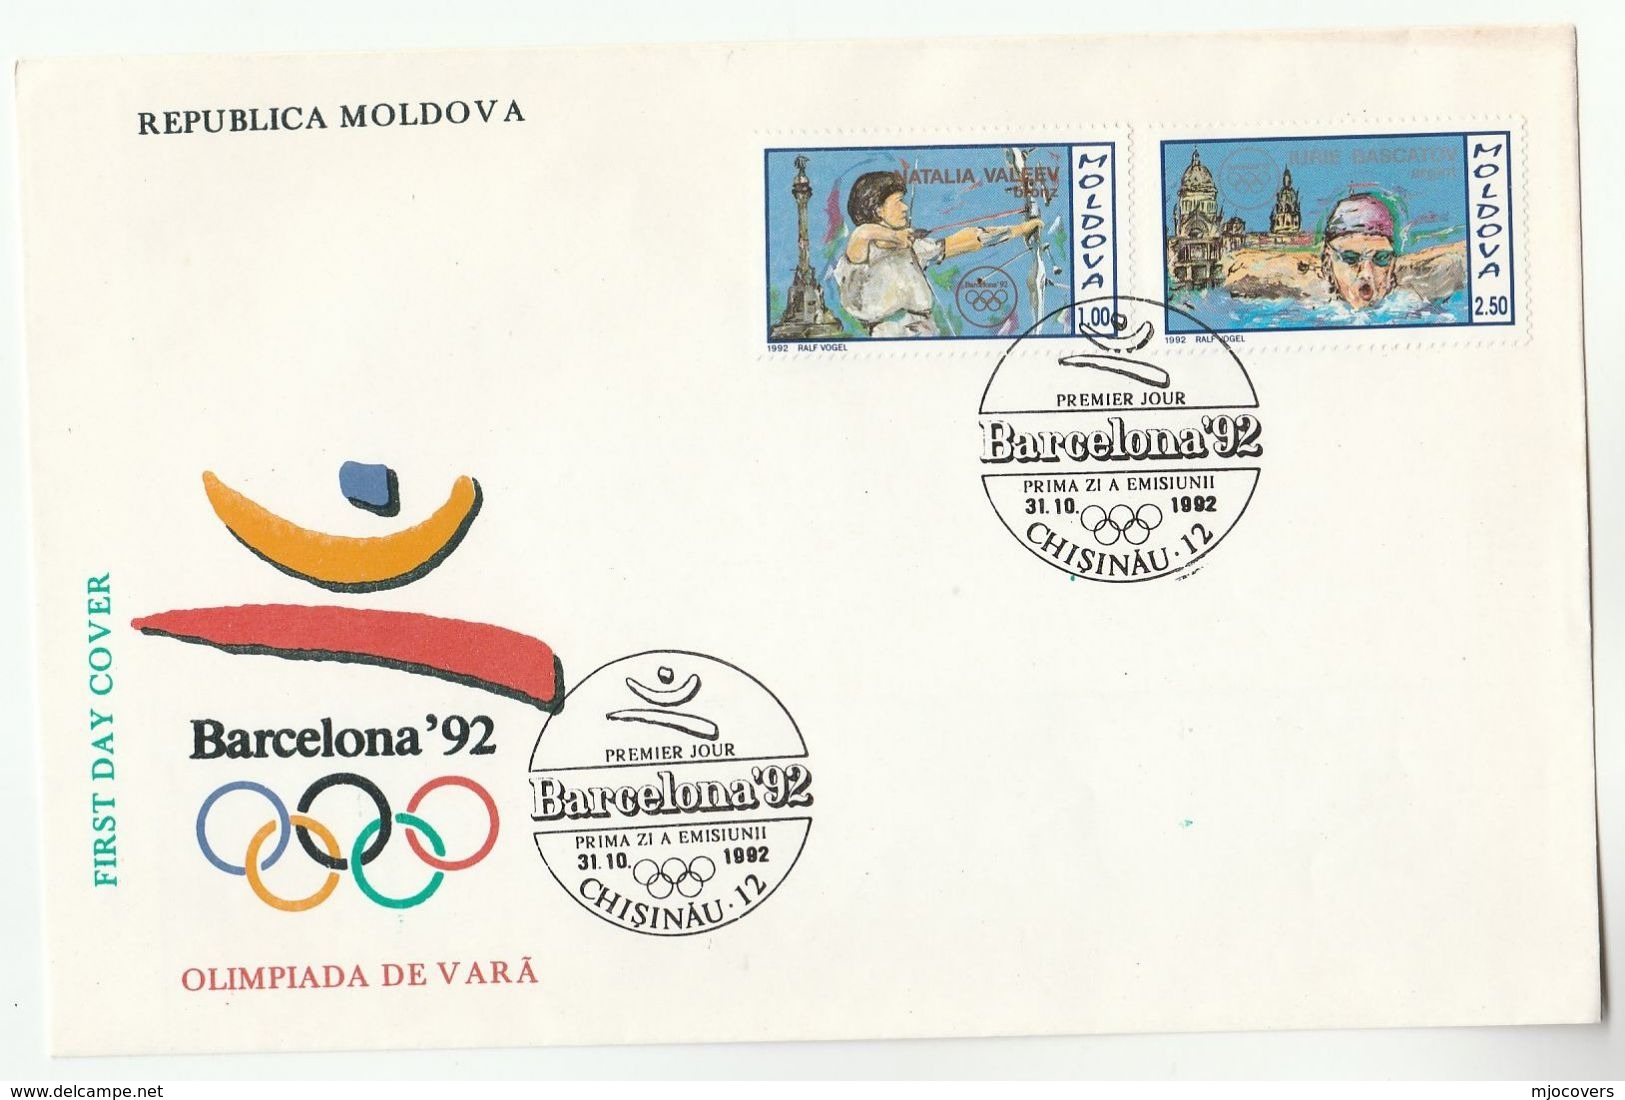 1992 MOLDOVA FDC Olympic ARCHERY, SWIMMING Cover Sport Olympics Games Stamps - Summer 1992: Barcelona